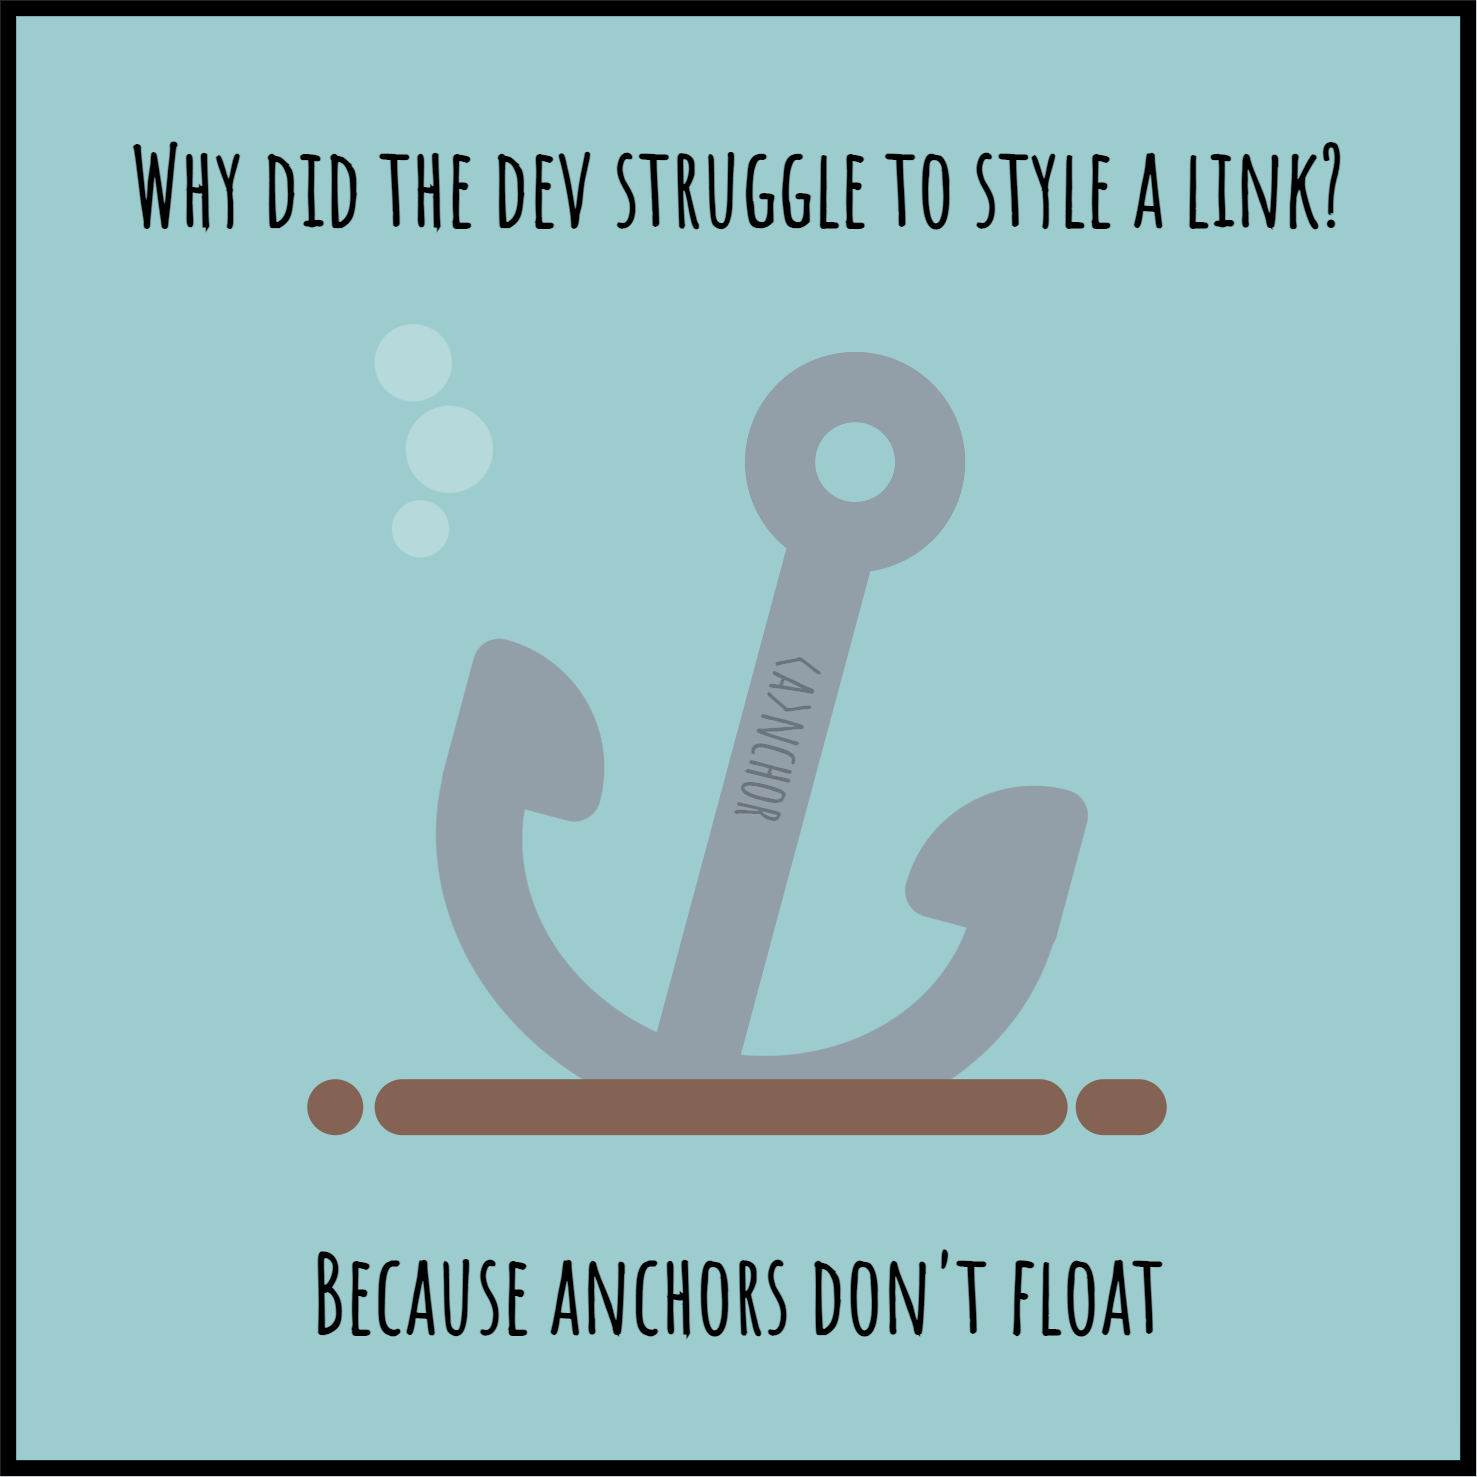 Why did the web developer struggle to style the link? Because anchors don't float